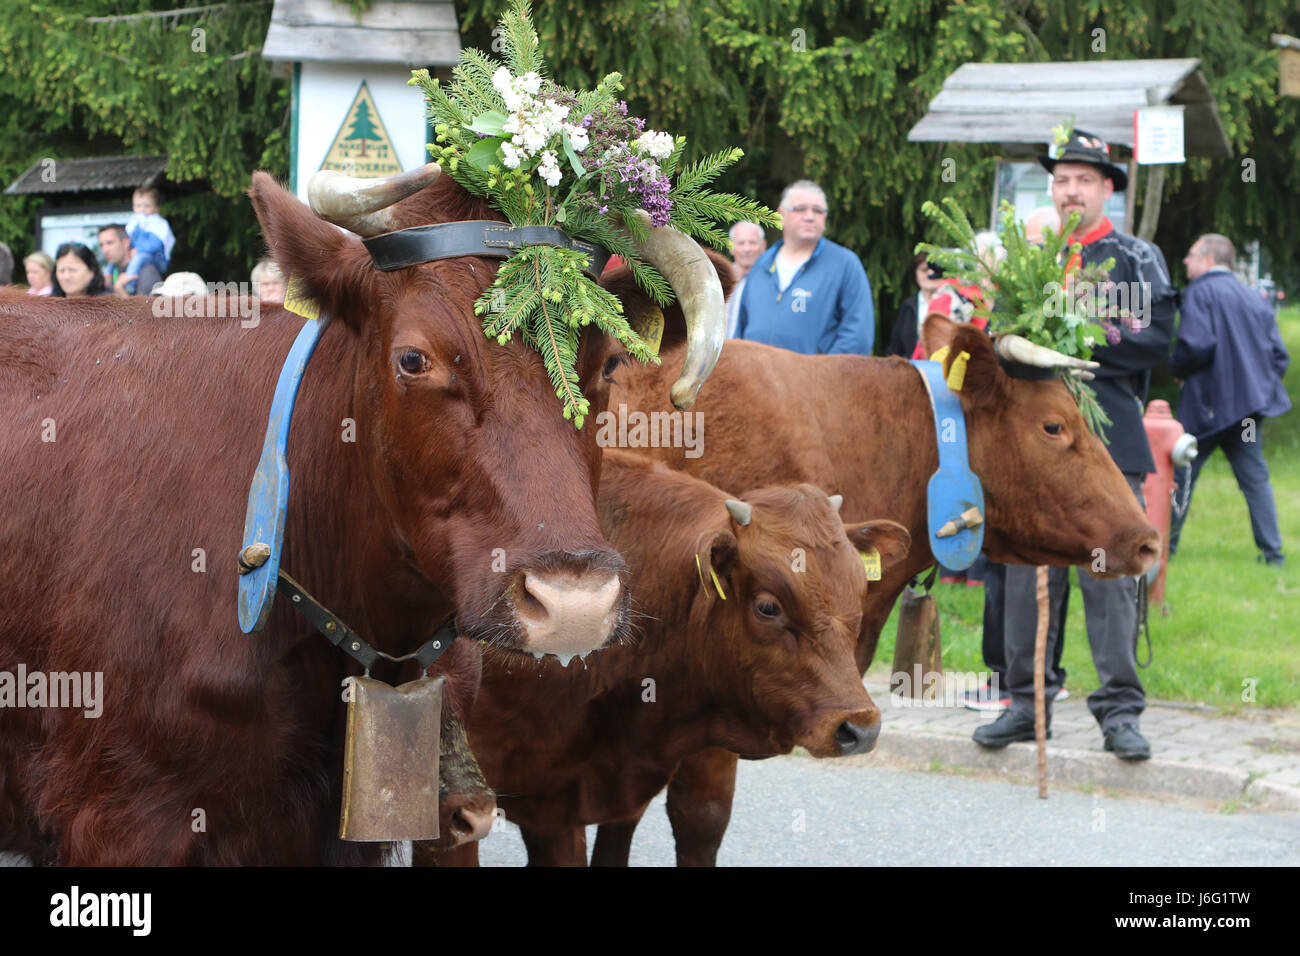 Tanne, Germany. 21st May, 2017. dpatop - Festively attired cows march through the town along with their owners during the traditional Cow Prom in Tanne, Germany, 21 May 2017. The Cow Prom took place under a sunny weather and with many spectators in the small town of Tanne in the Harz mountains. More than 20 cows with colourful head-dresses executed on Sunday a large procession through the town along with their owners. Photo: Matthias Bein/dpa-Zentralbild/dpa/Alamy Live News Stock Photo